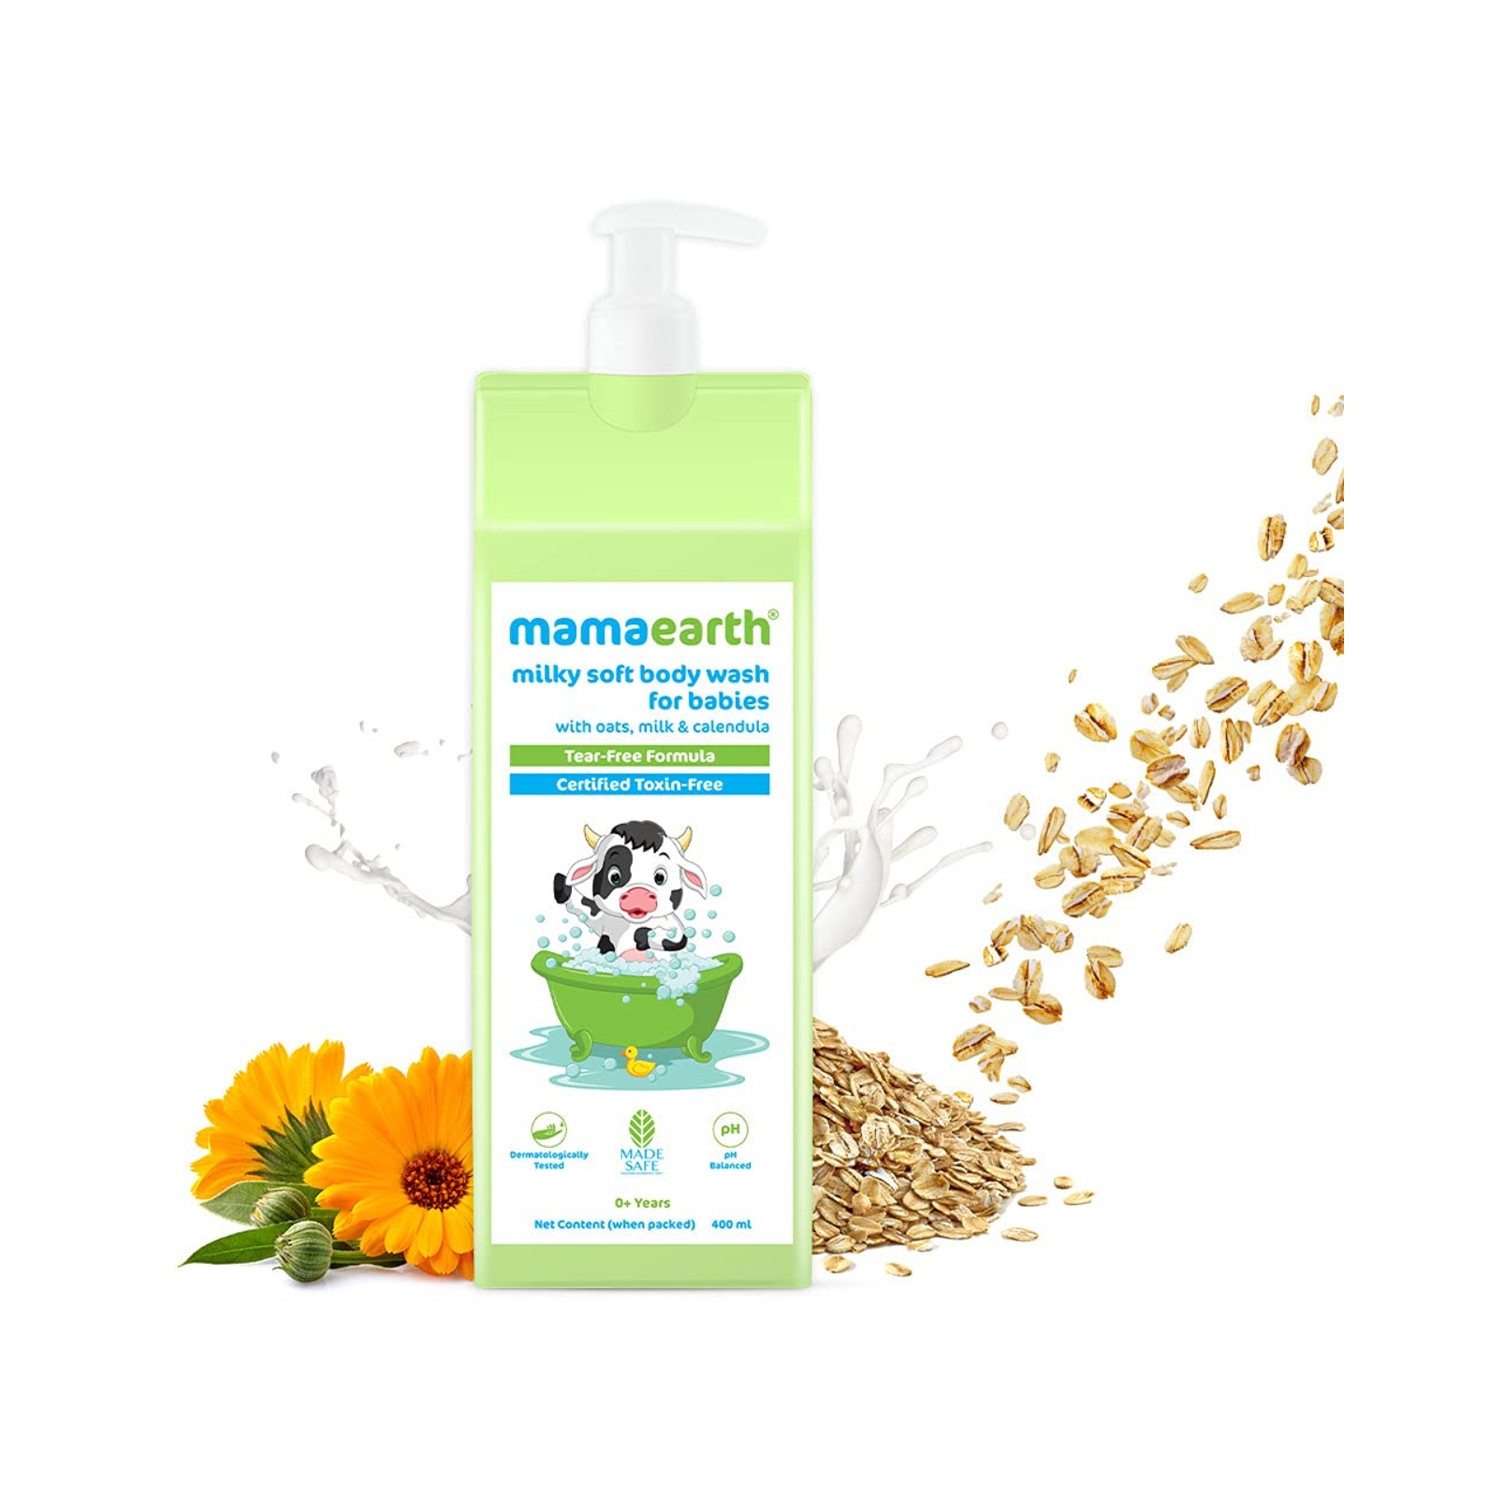 Mamaearth | Mamaearth Milky Soft Body Wash For Babies With Oats Milk And Calendula (400ml)